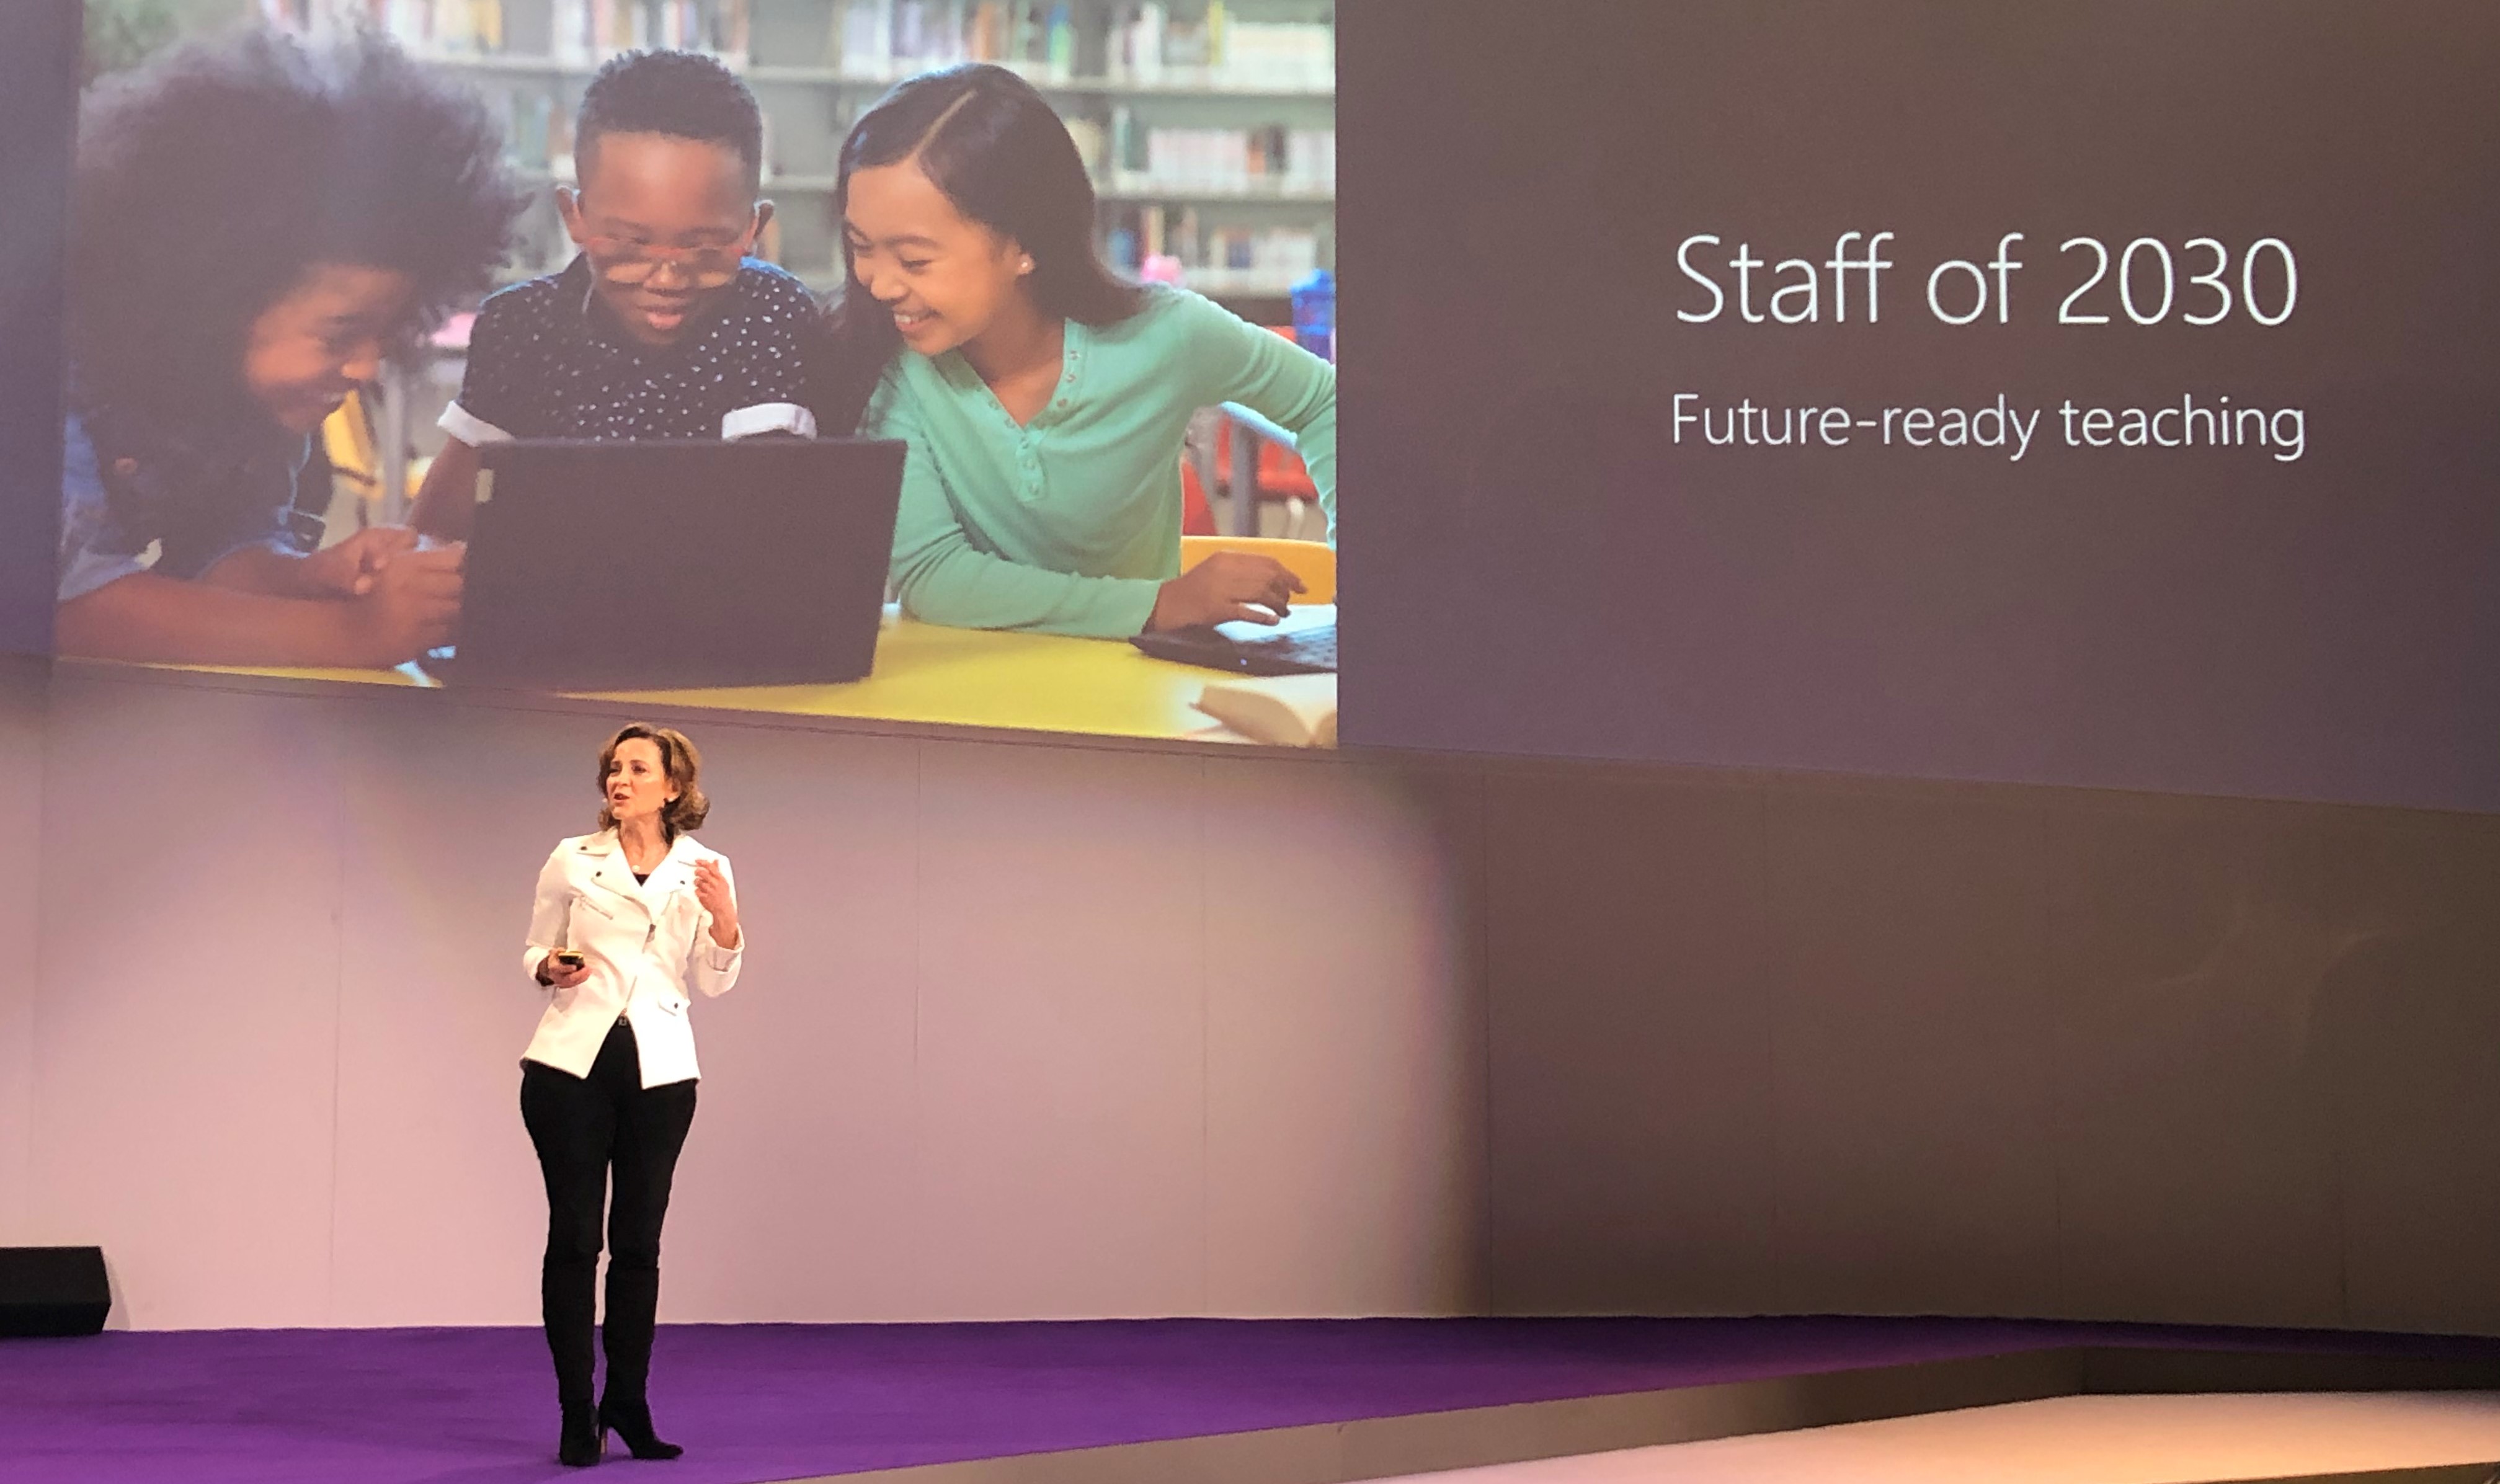 Barbara Holzapfel, General Manager of Education Marketing at Microsoft, speaks on stage at BETT